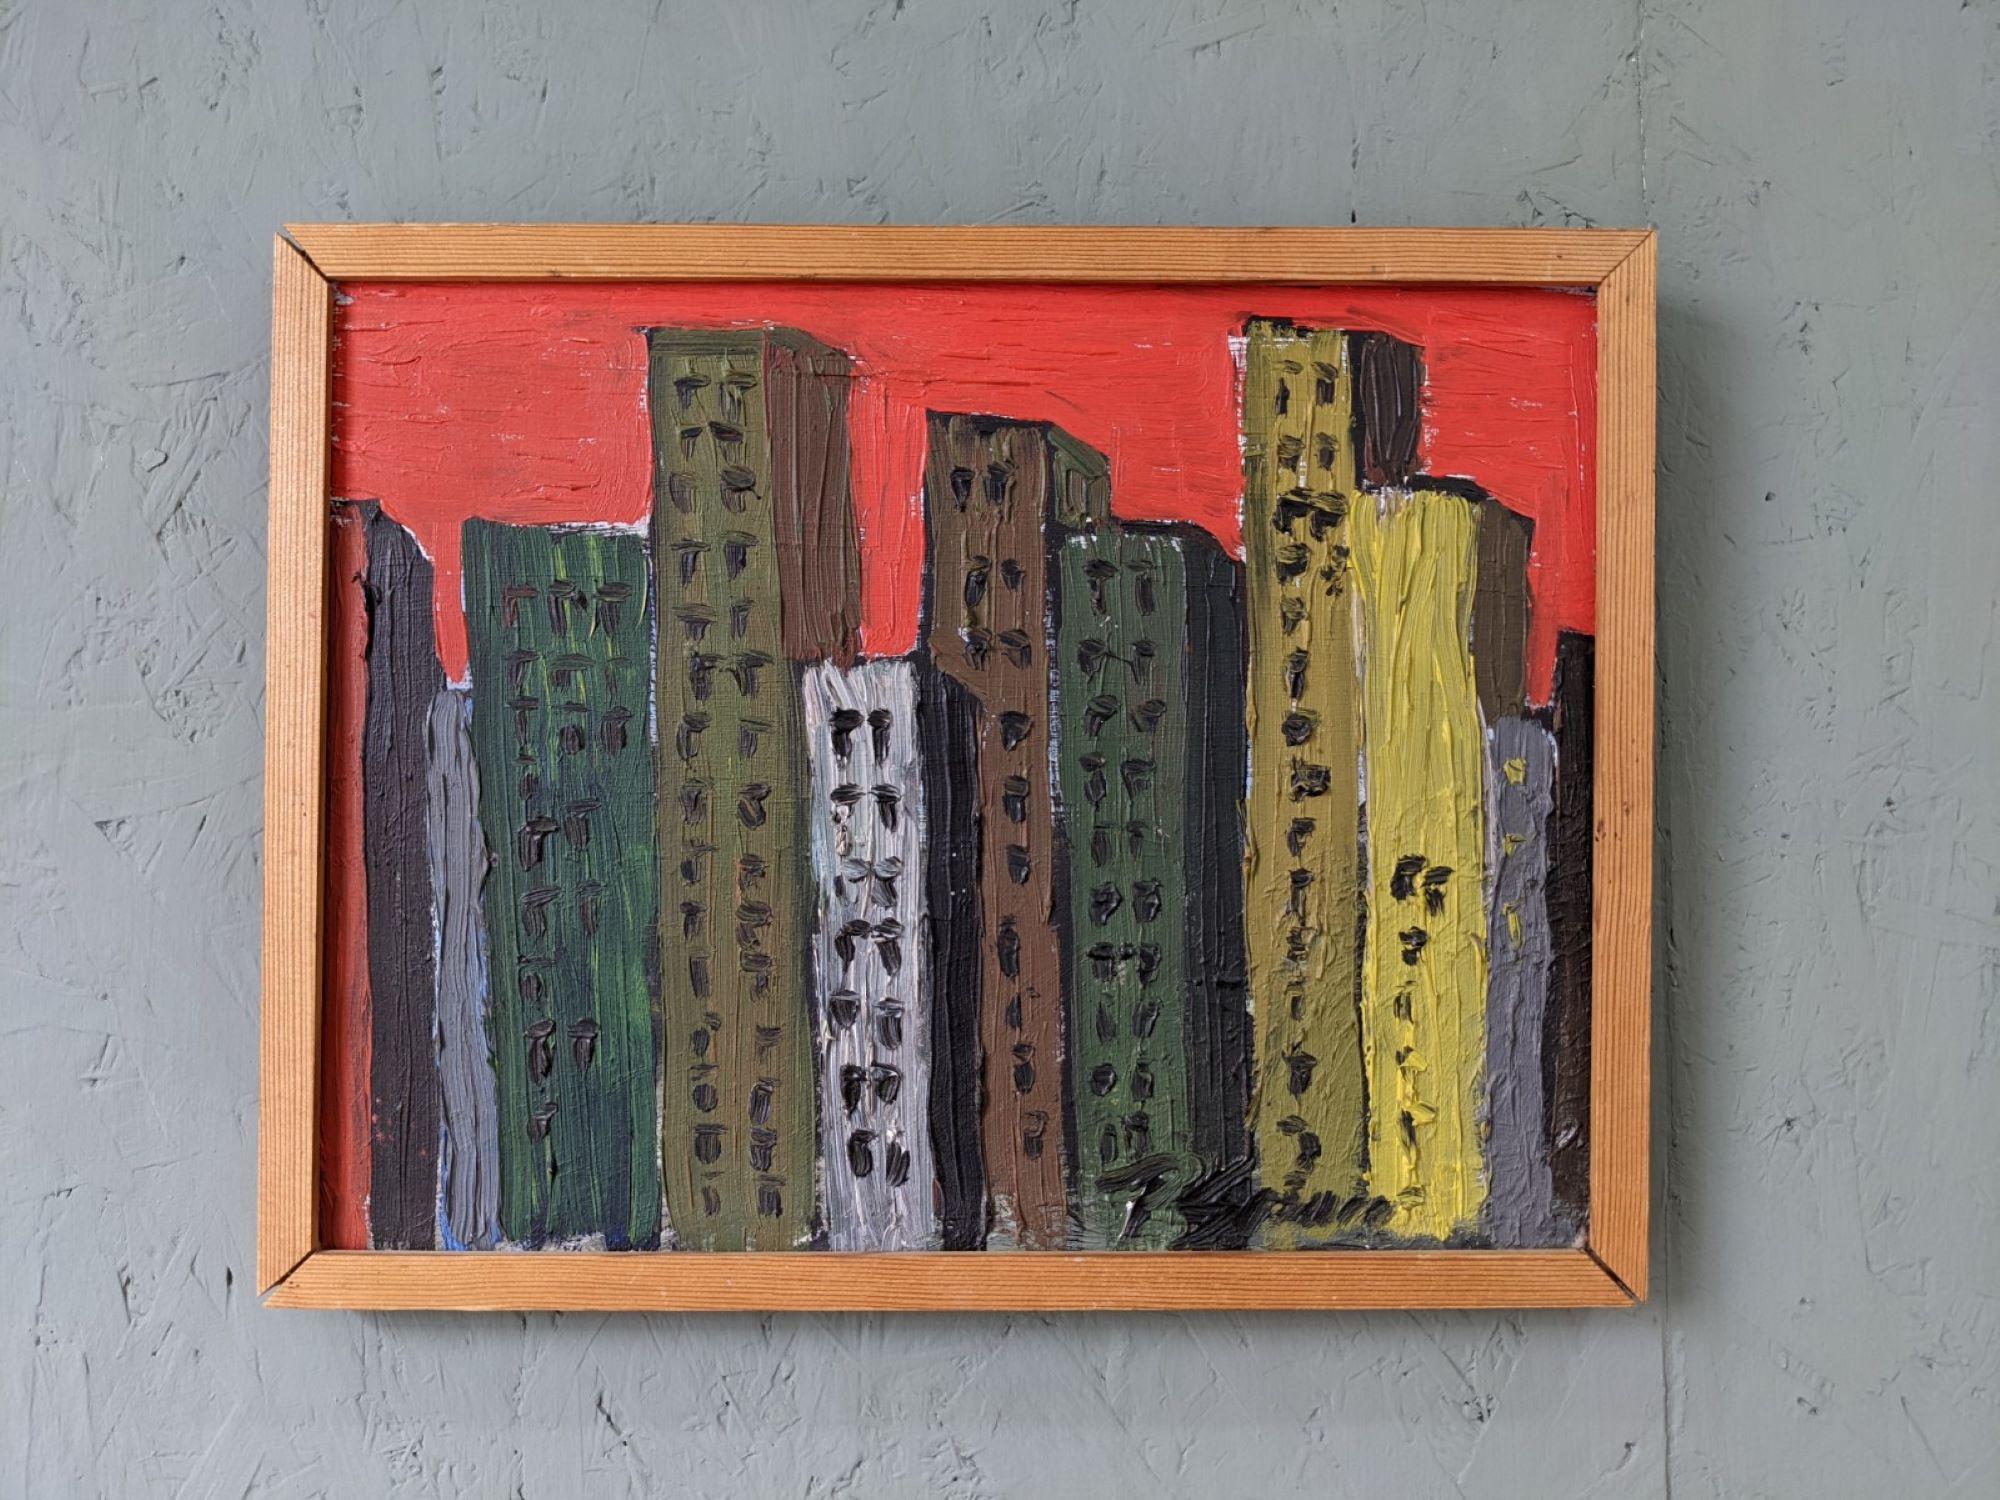 SKYLINE
Size: 29 x 37 cm (including frame)
Oil on board

A small and vibrant modernist oil composition, featuring a city skyline where rows of tall buildings are set against a striking red background.

Painted in an expressive manner, the artist has